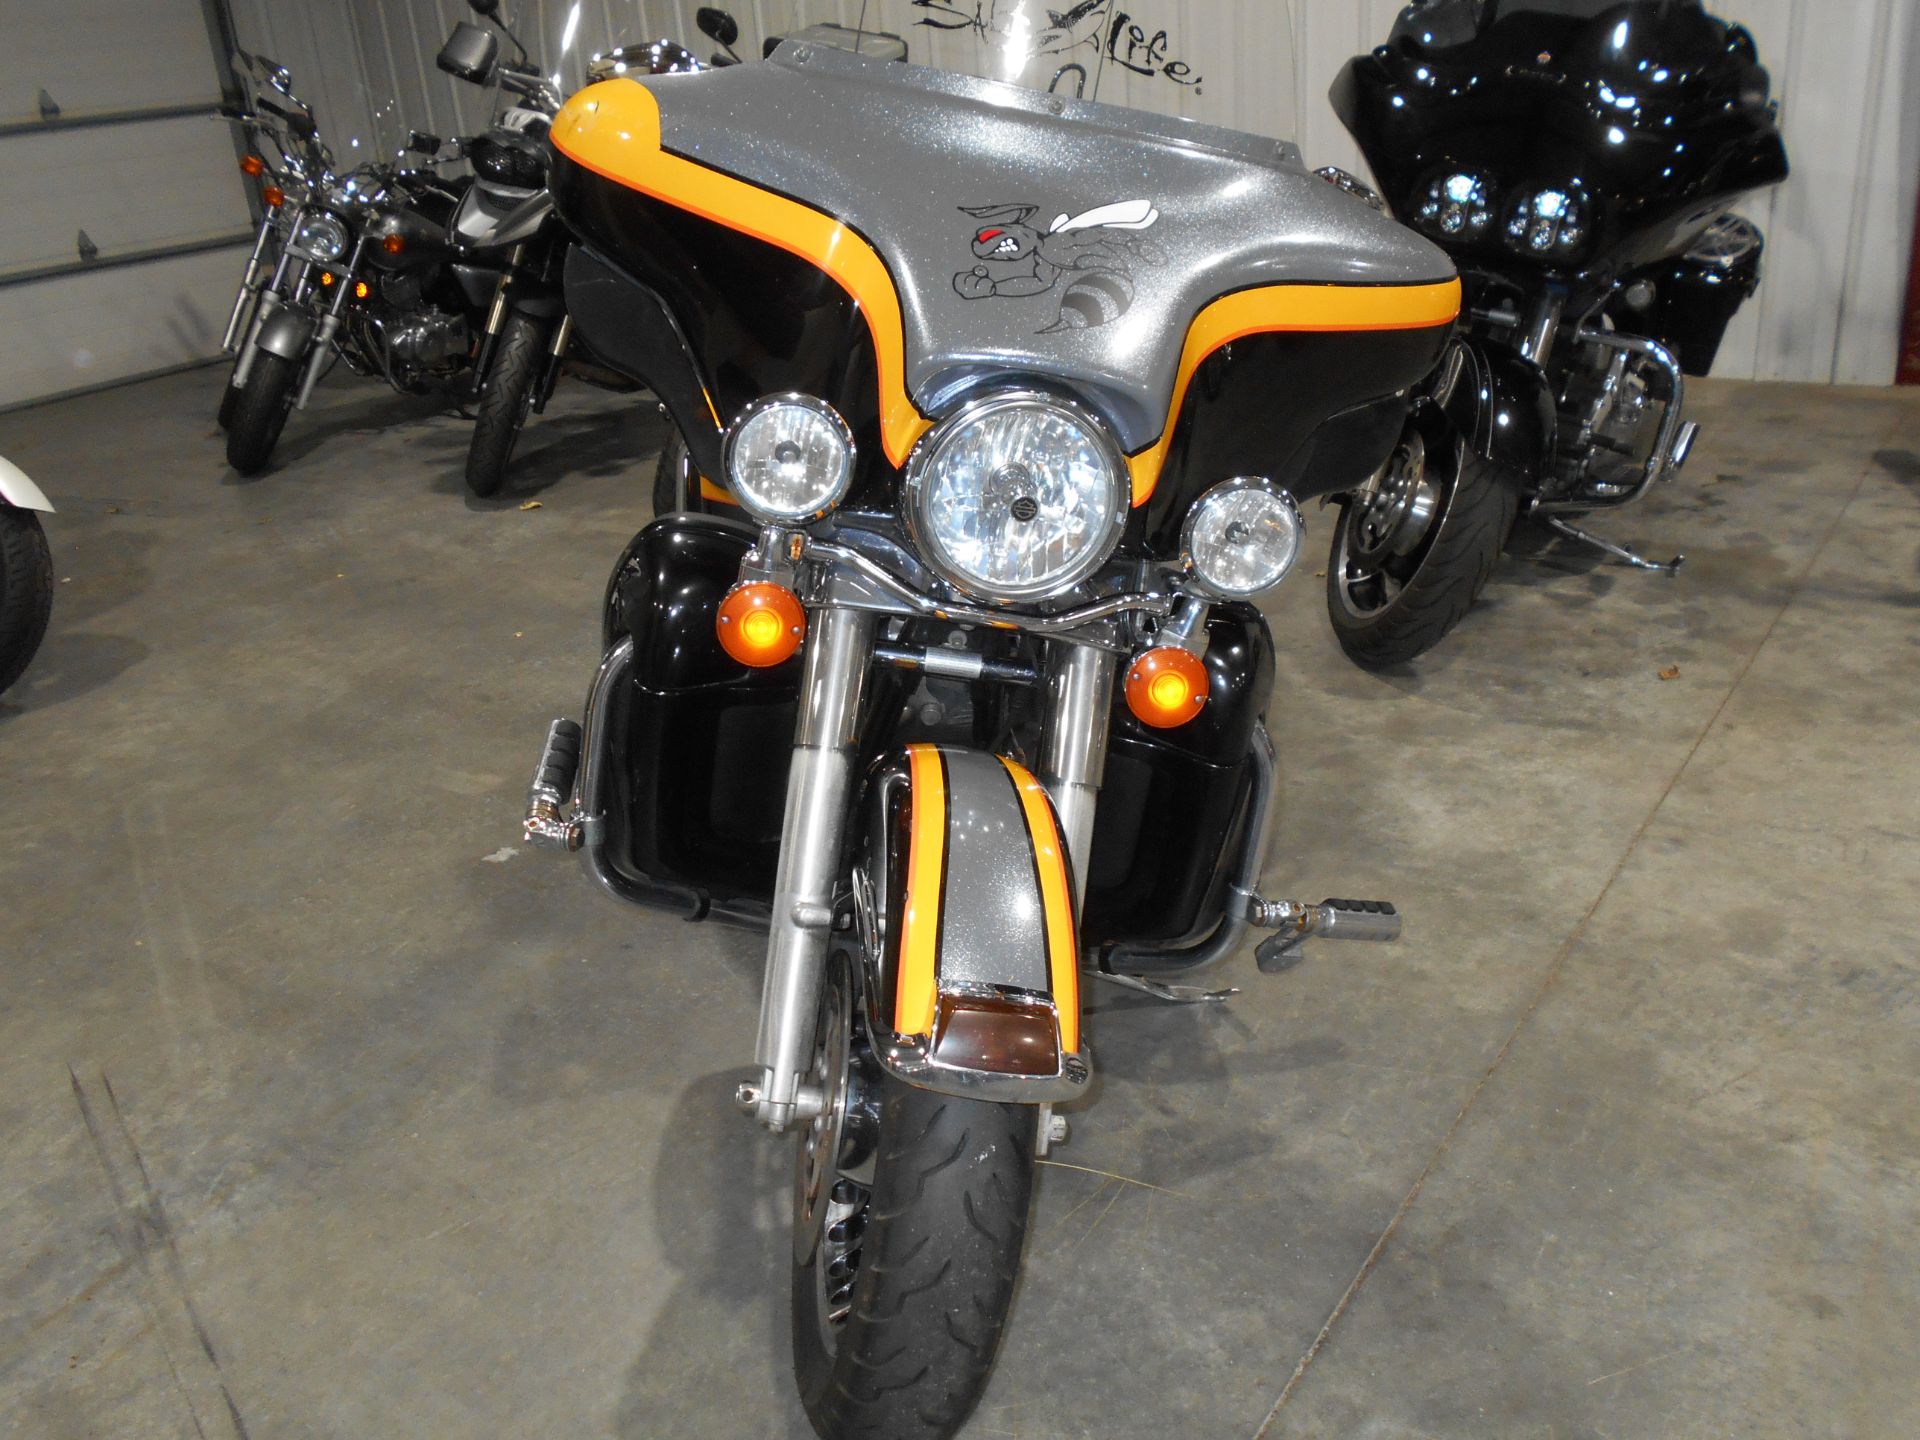 2013 Harley-Davidson Electra Glide® Ultra Limited in Mauston, Wisconsin - Photo 4